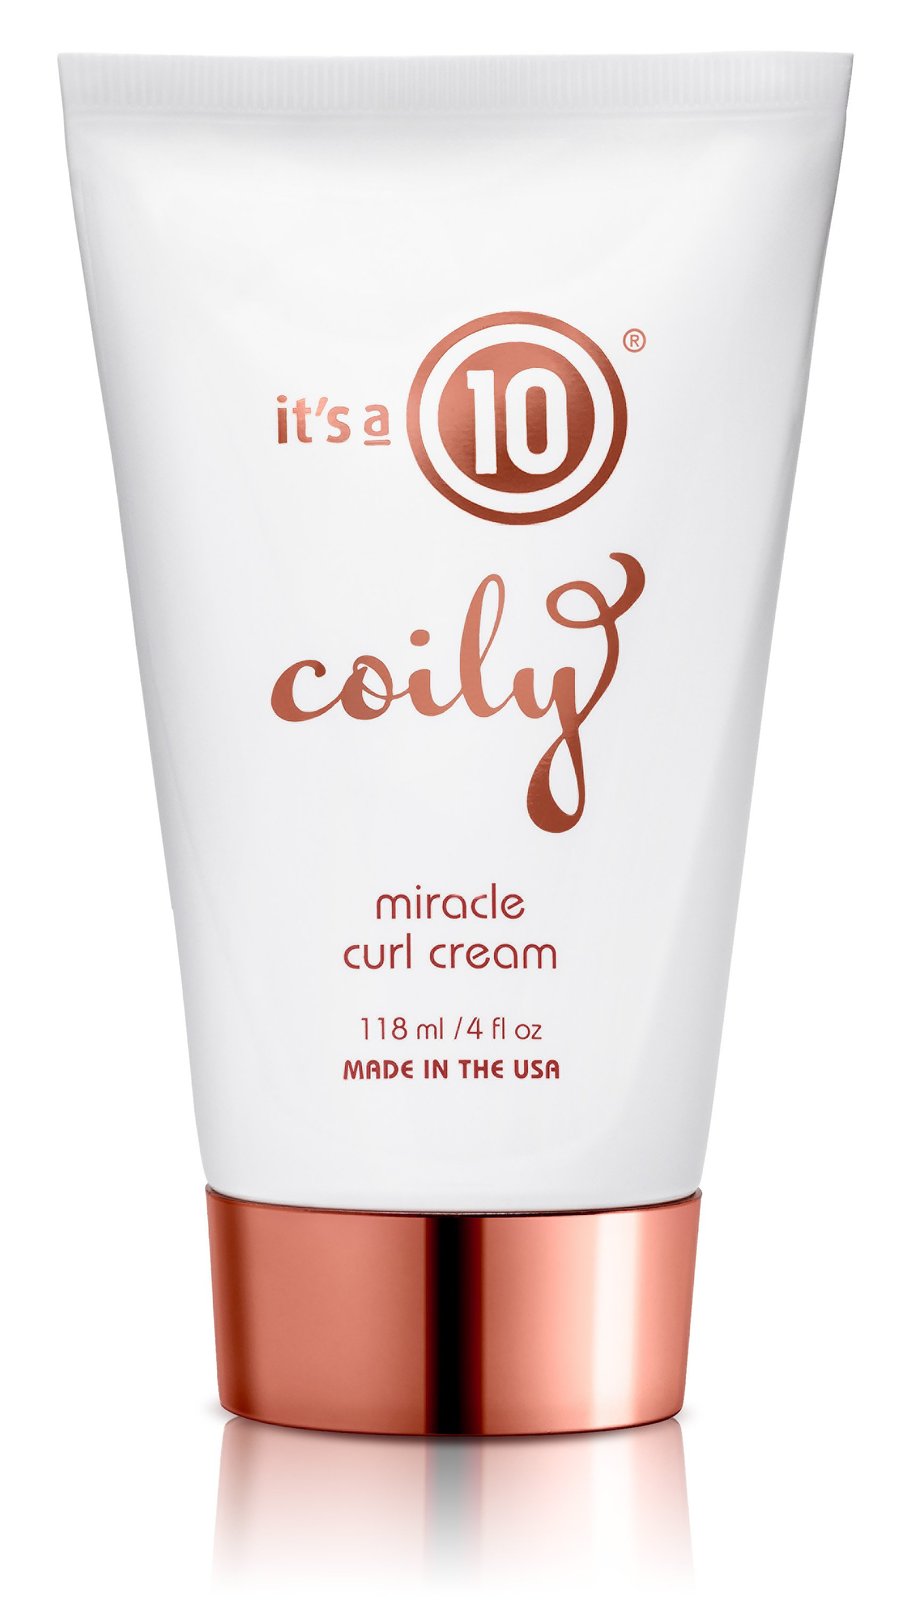 It's A 10 Miracle Curl Cream 4oz - $31.00